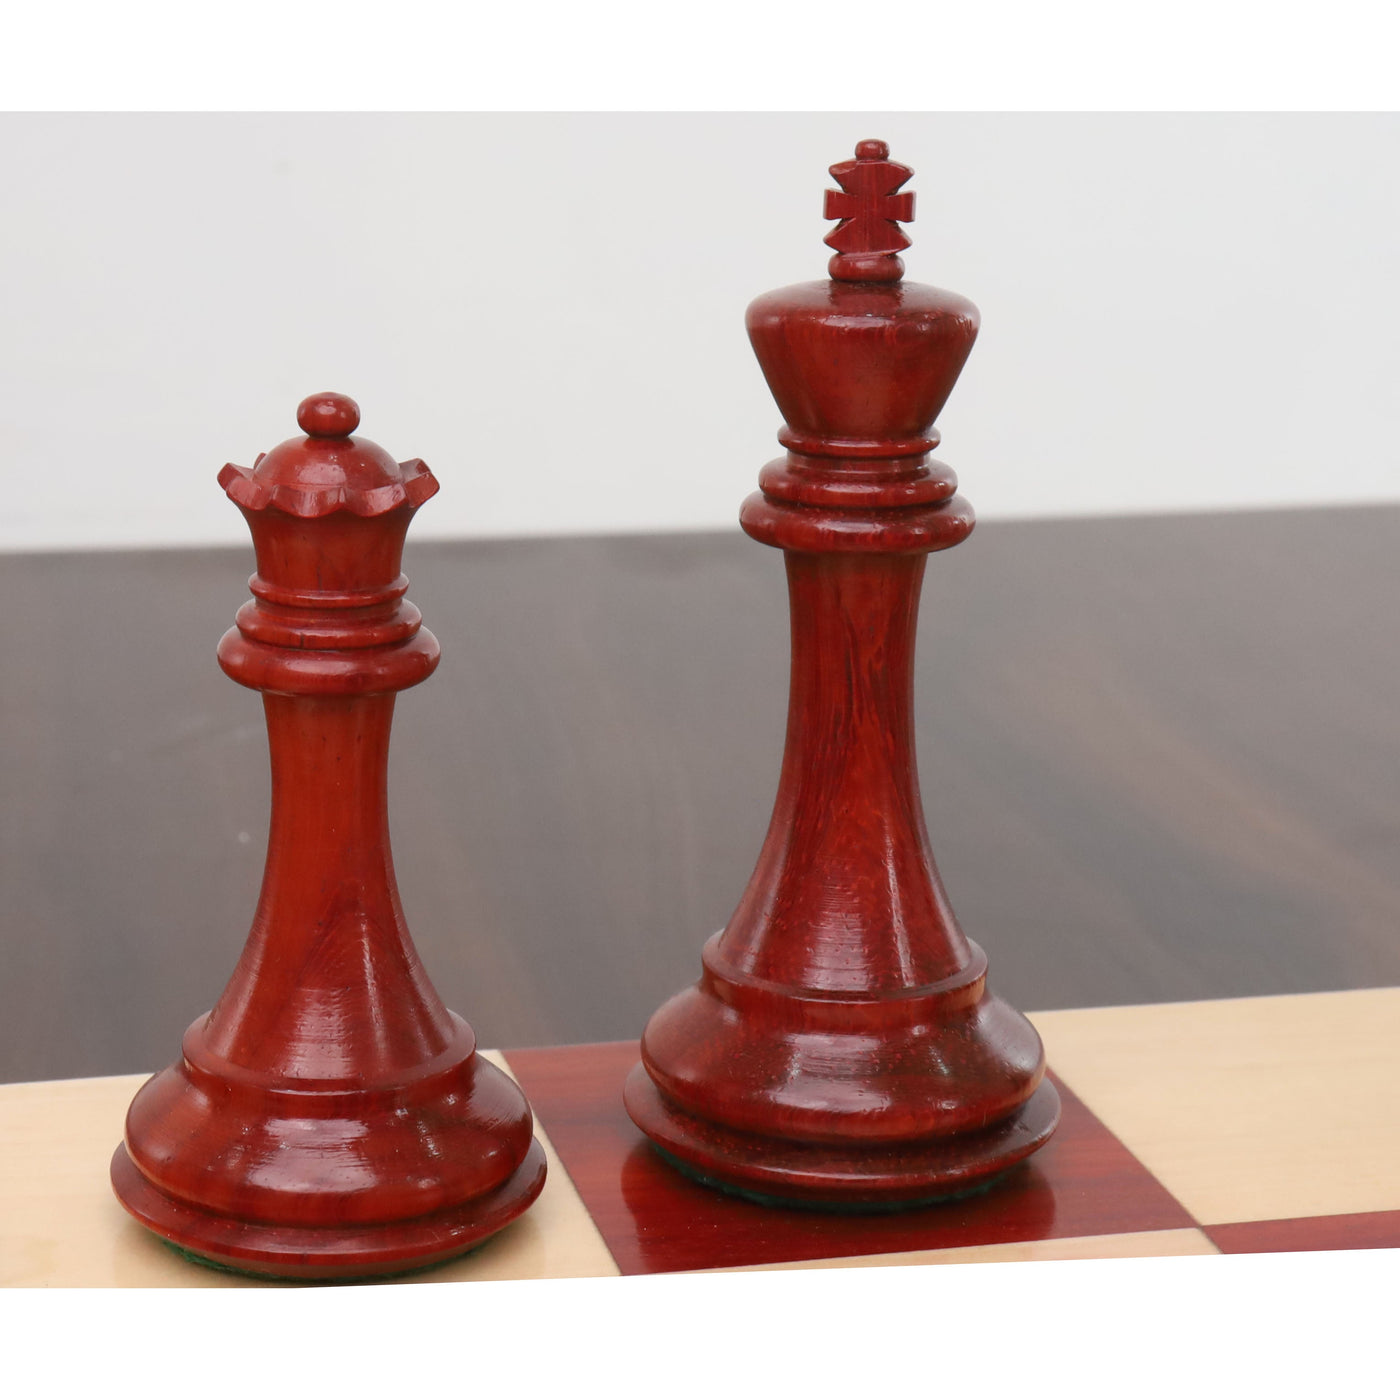 4" Sleek Staunton Luxury Chess Set - Chess Pieces Only - Triple Weighted Bud Rose Wood